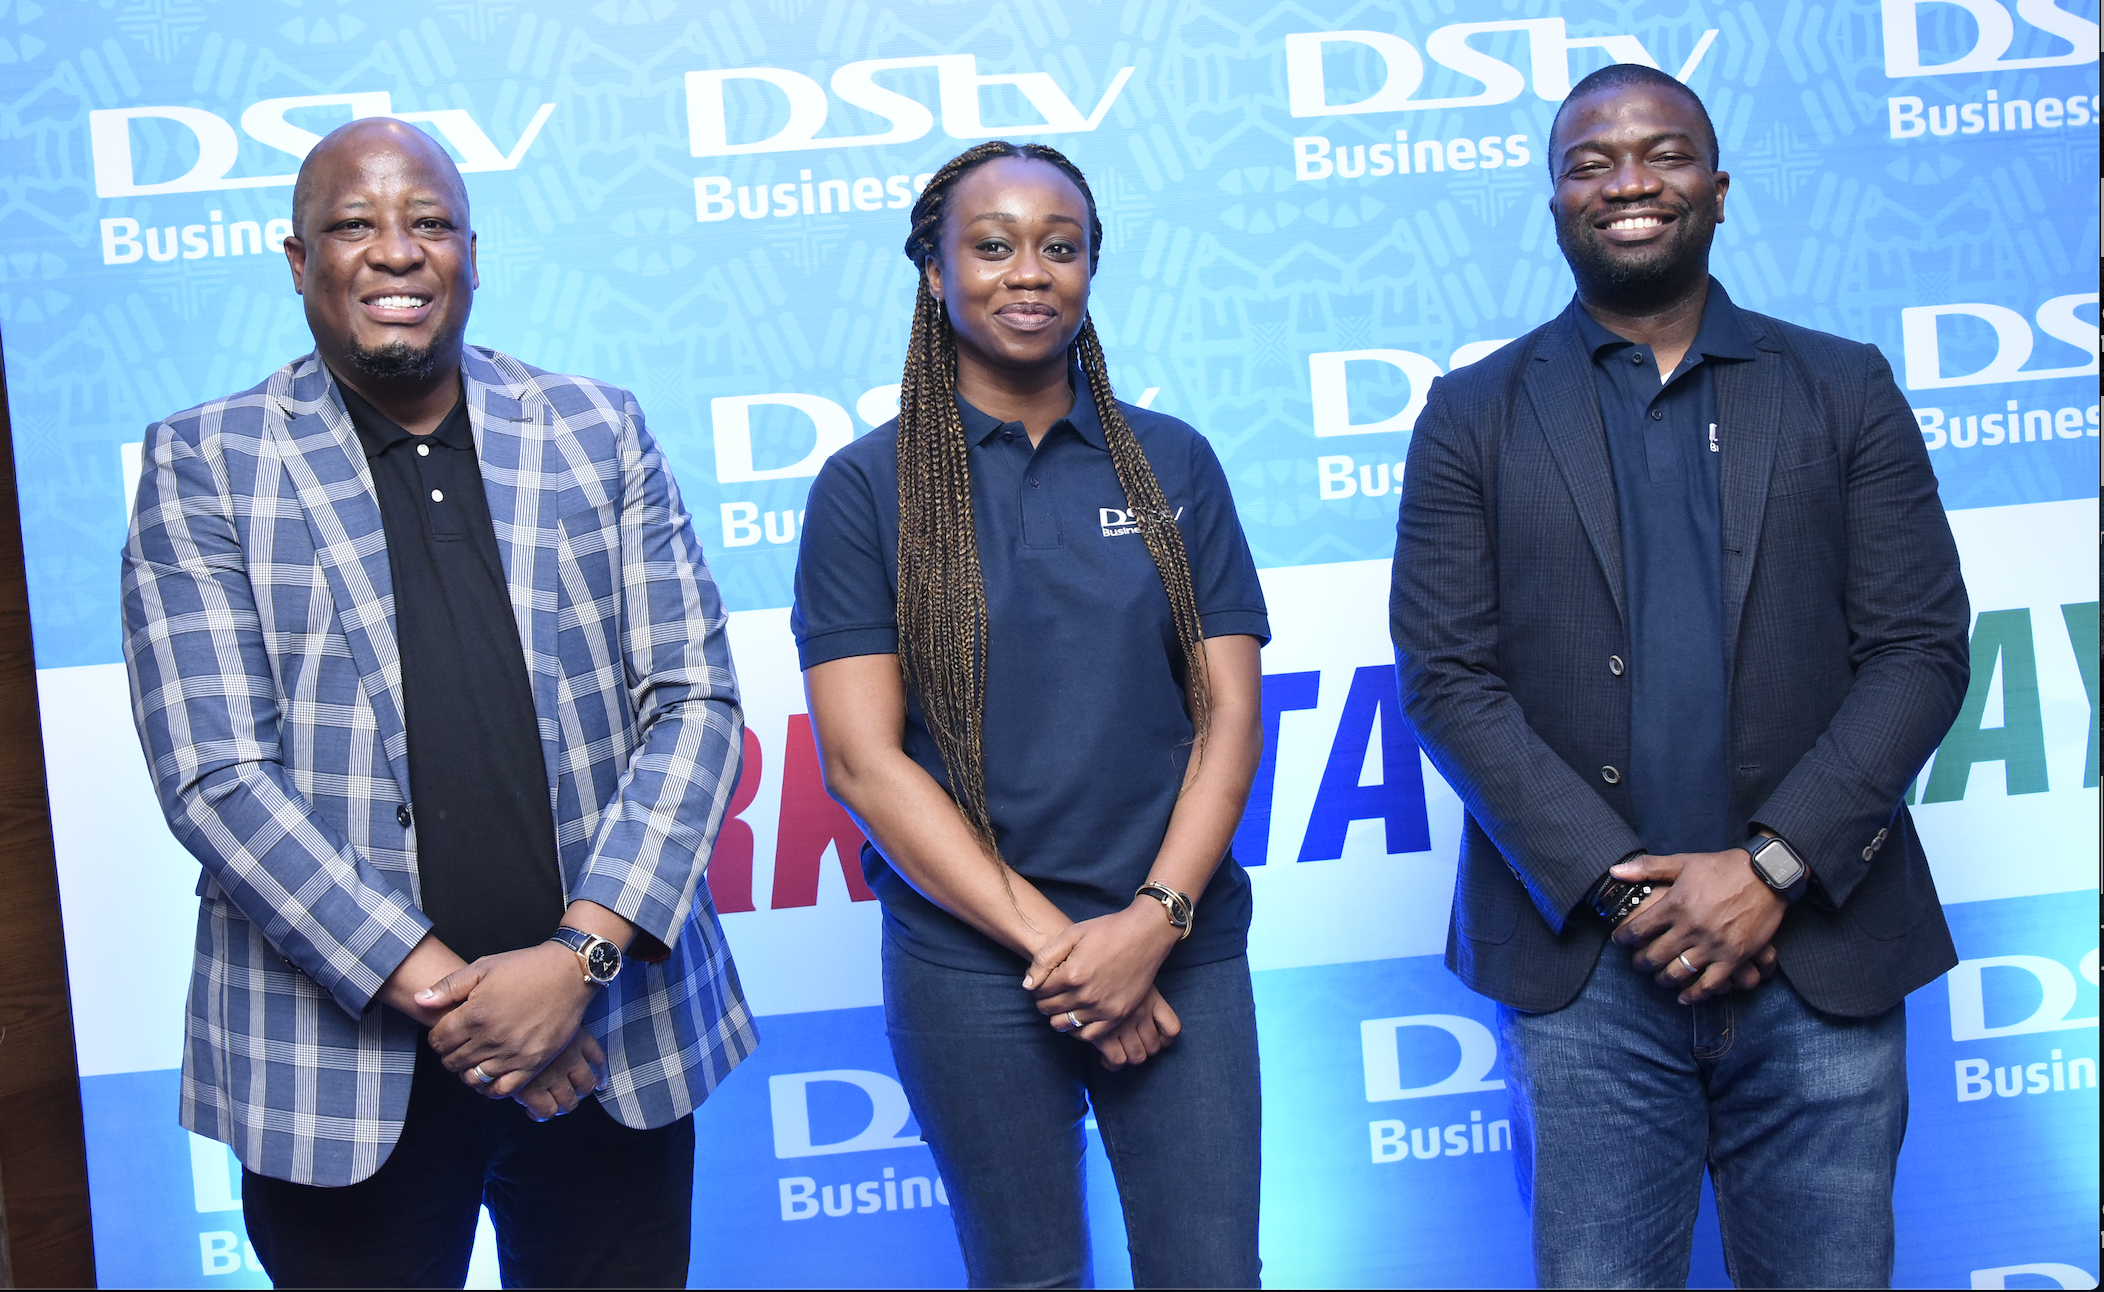 MultiChoice Nigeria Introduces New & Revamped DStv Business Packages, SiliconNigeria